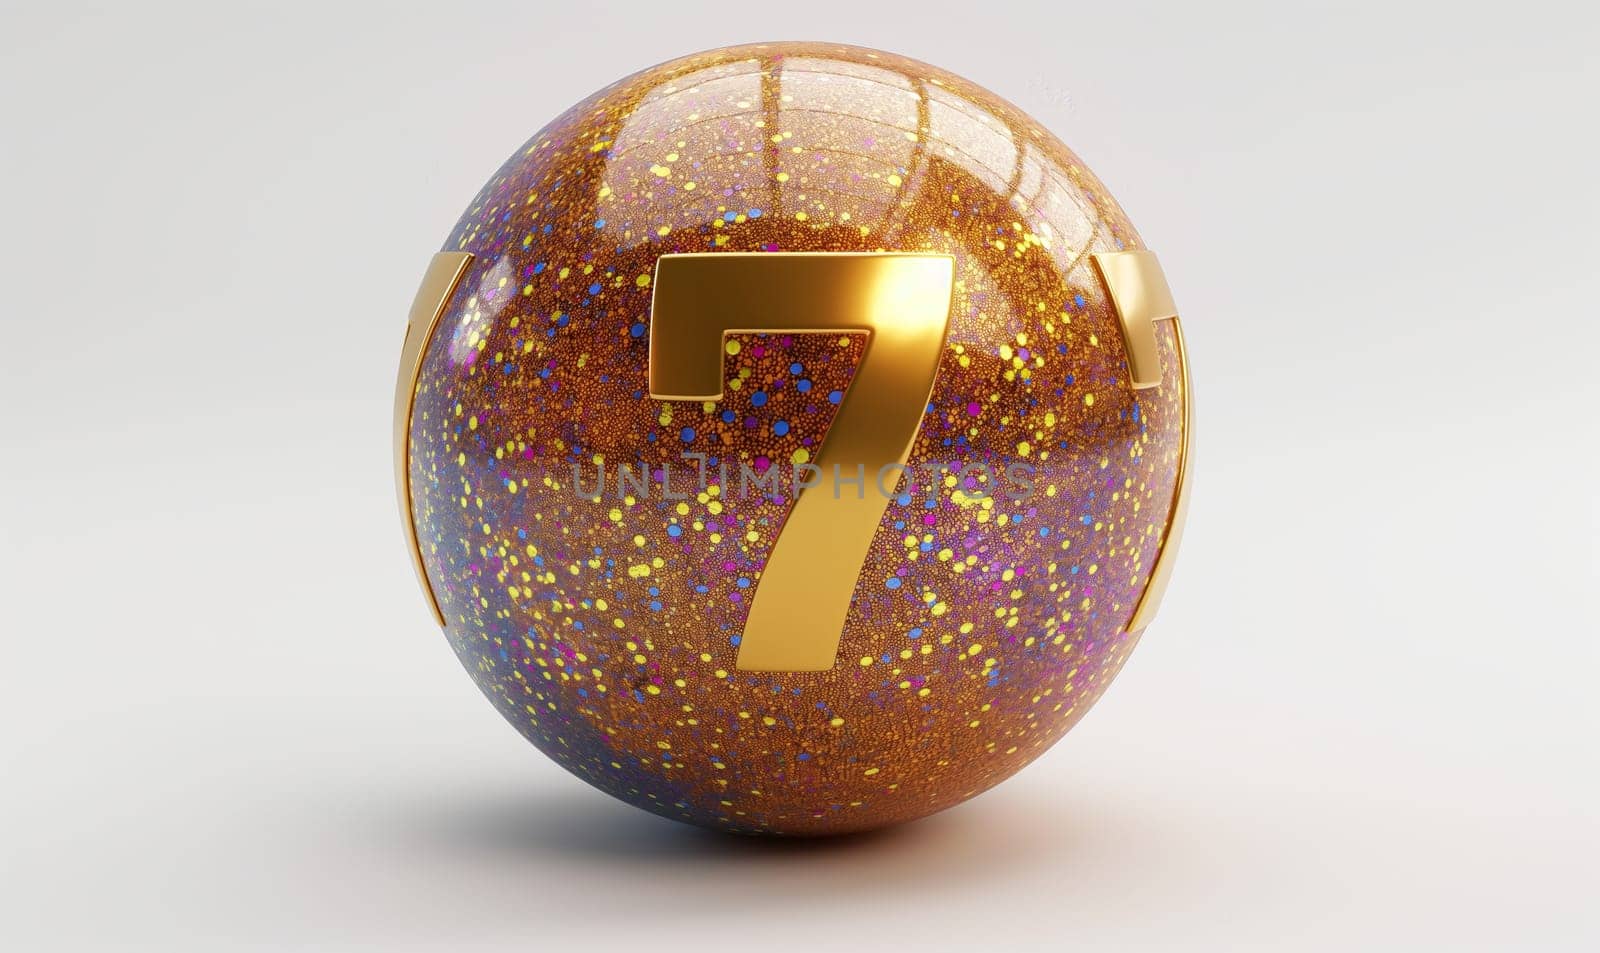 Golden ball with a number 7 on a white background. Selective focus.